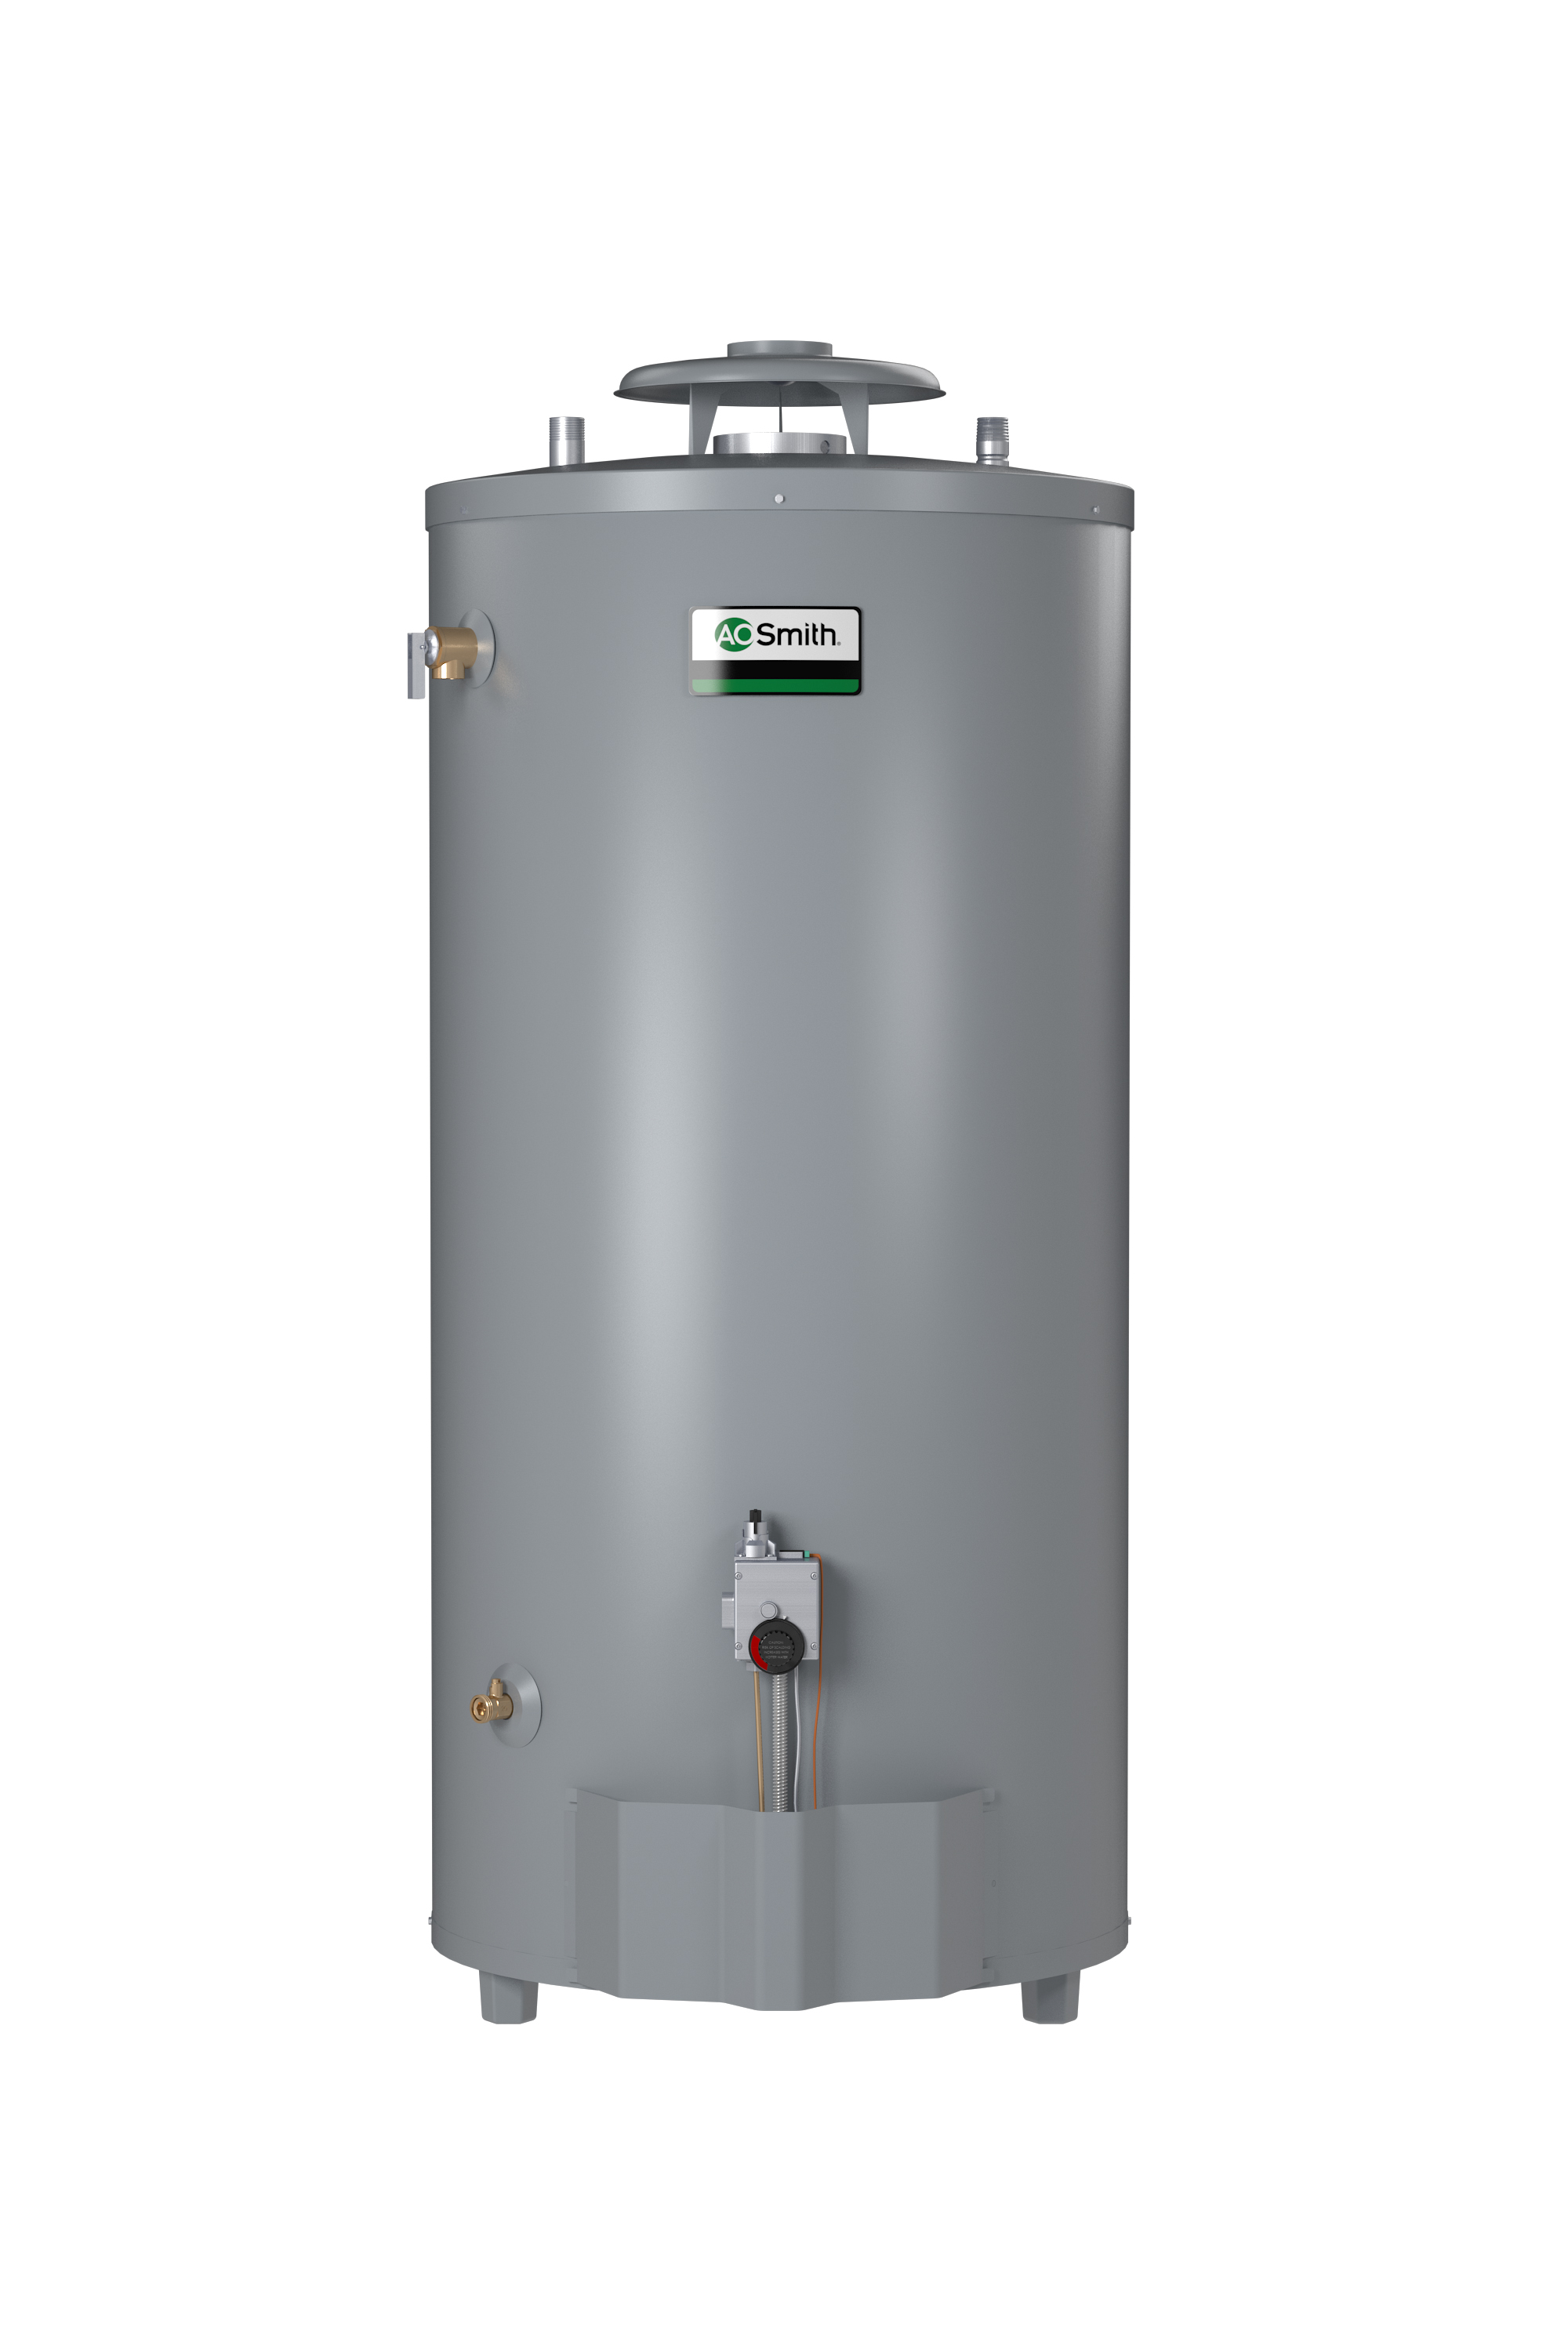 AO SMITH BT-100: 98 GALLON, 75,100 BTU,  4inch VENT, CONSERVATIONIST SINGLE FLUE, LIGHT DUTY, NATURAL GAS COMMERCIAL WATER HEATER